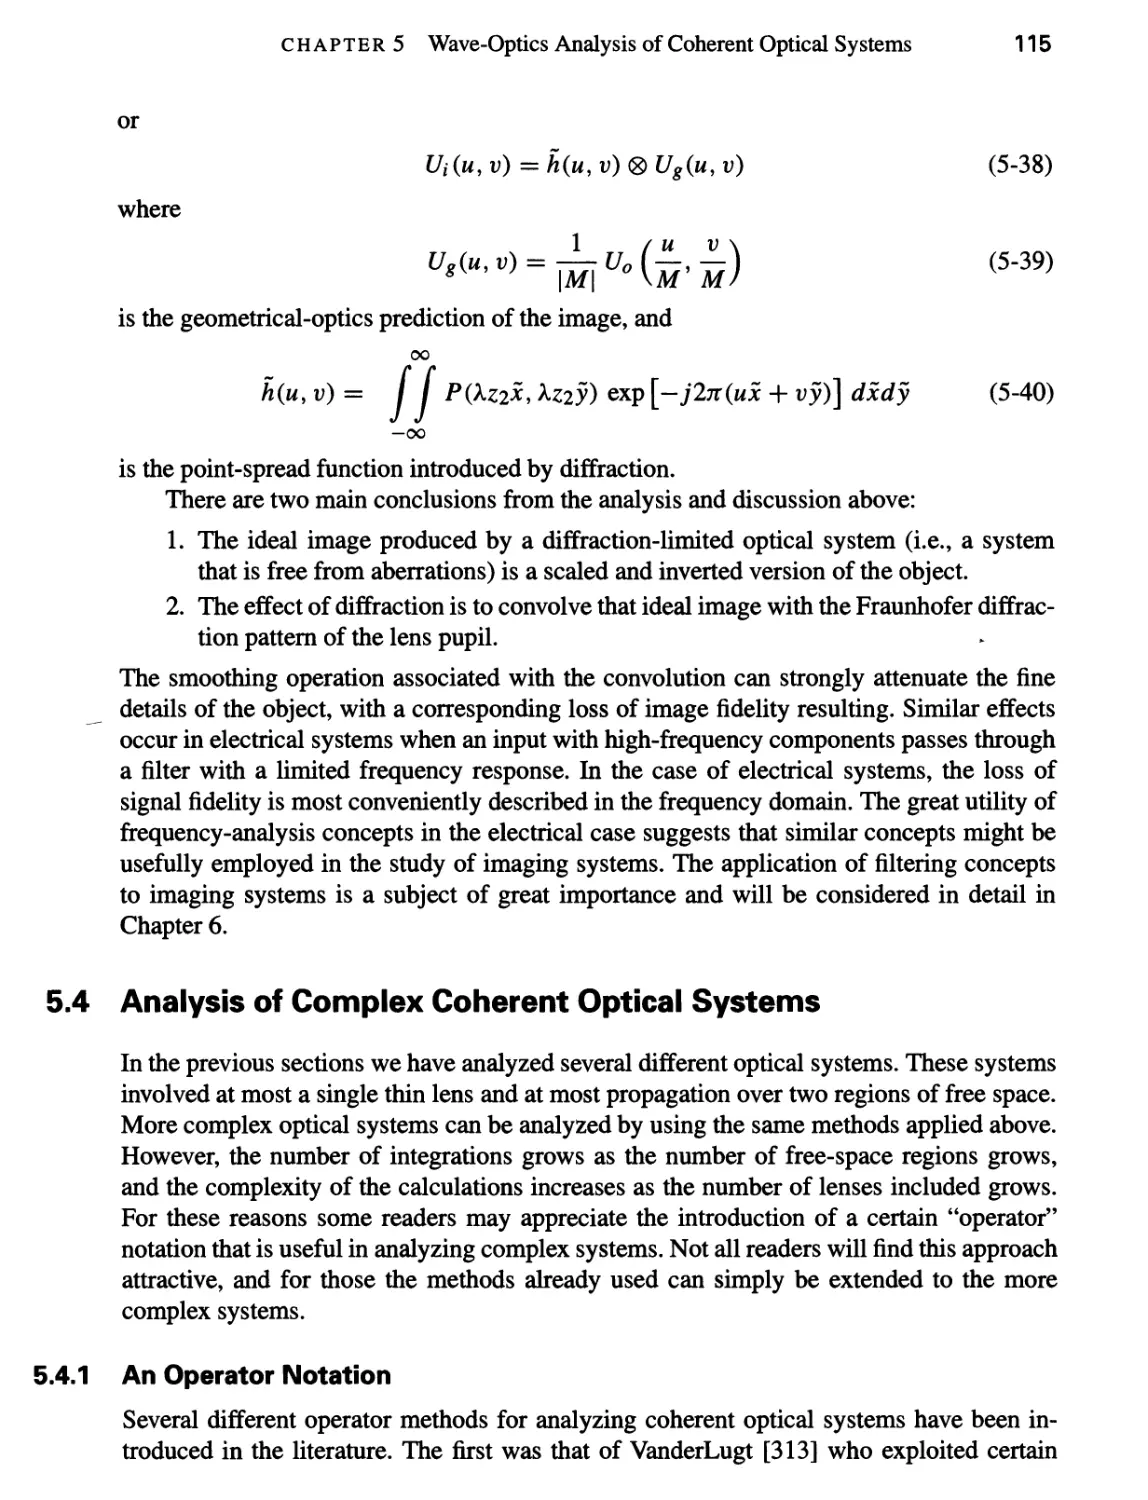 5.4 Analysis of Complex Coherent Optical Systems 115